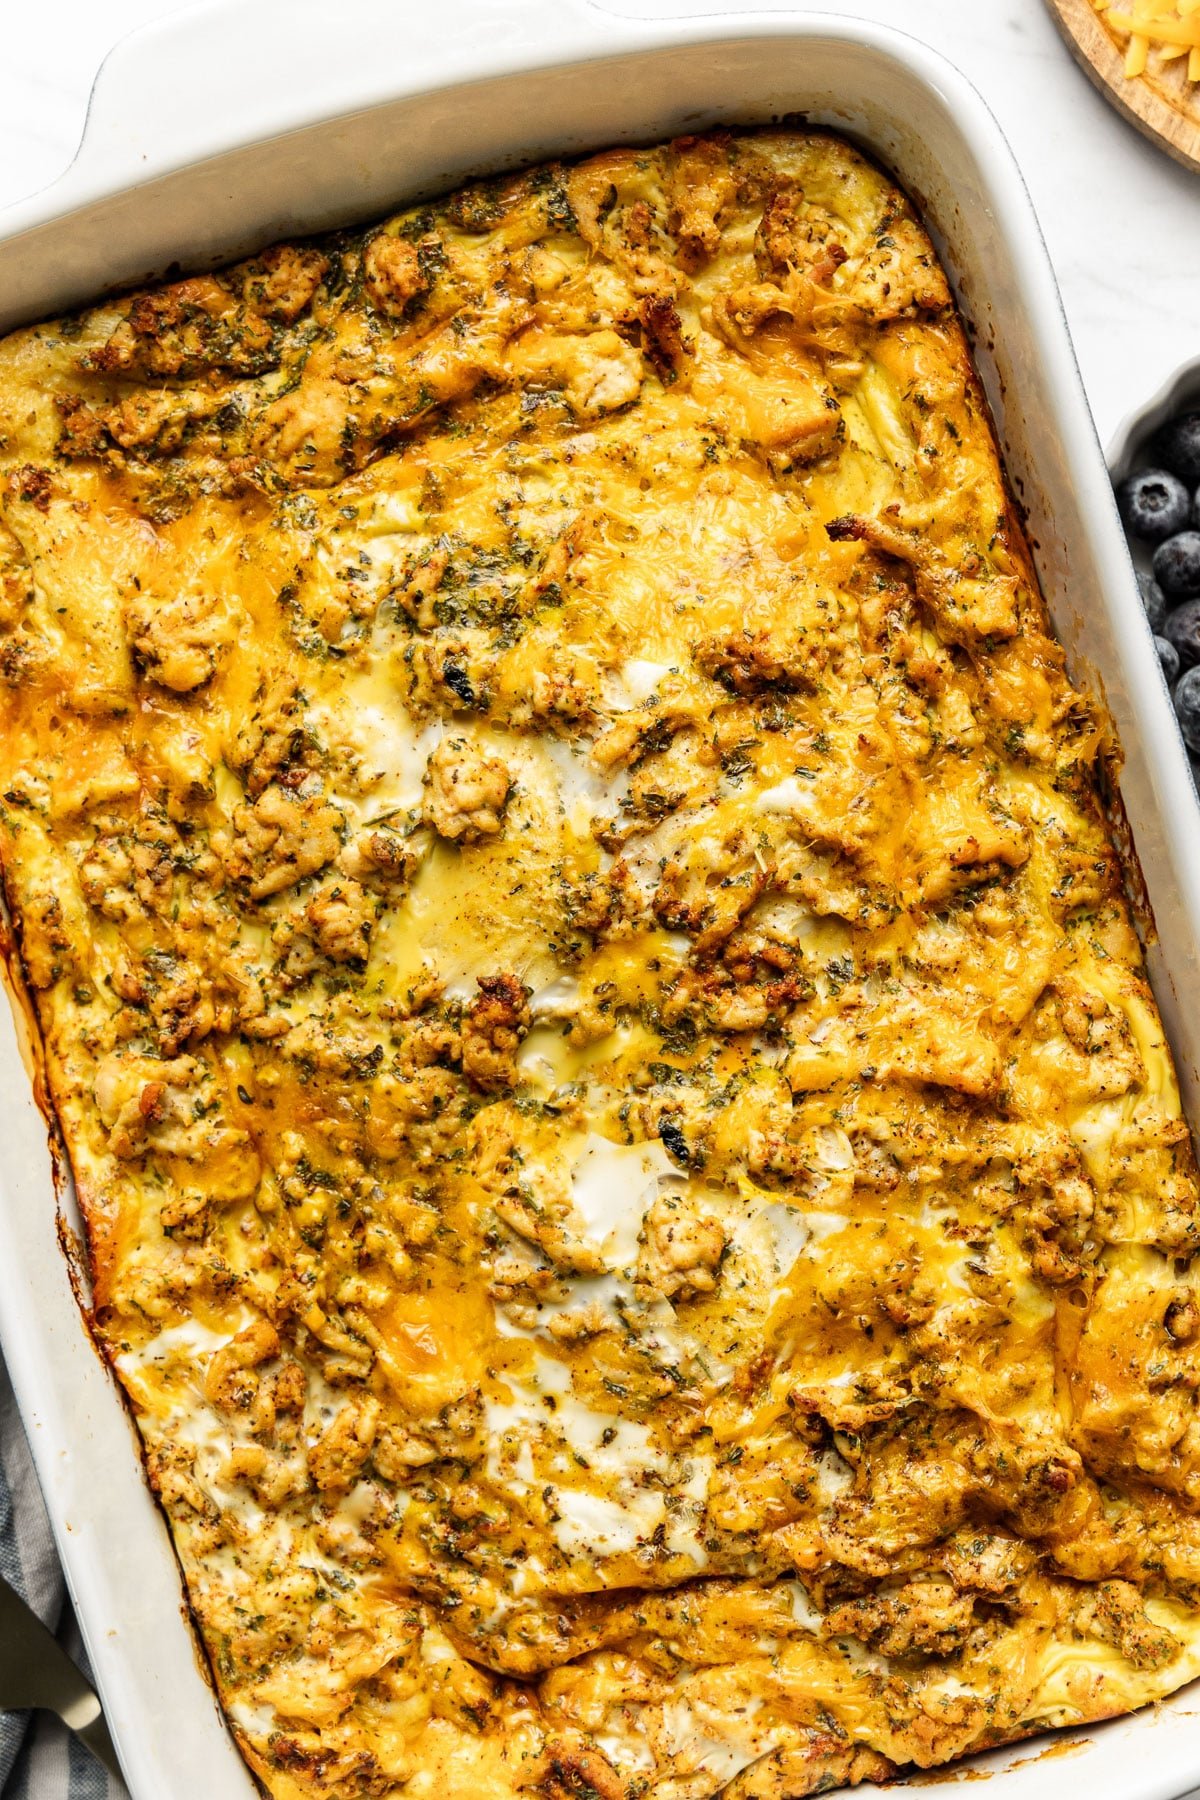 https://thewholecook.com/wp-content/uploads/2022/01/Sausage-and-Cheddar-Breakfast-Casserole-1.jpg